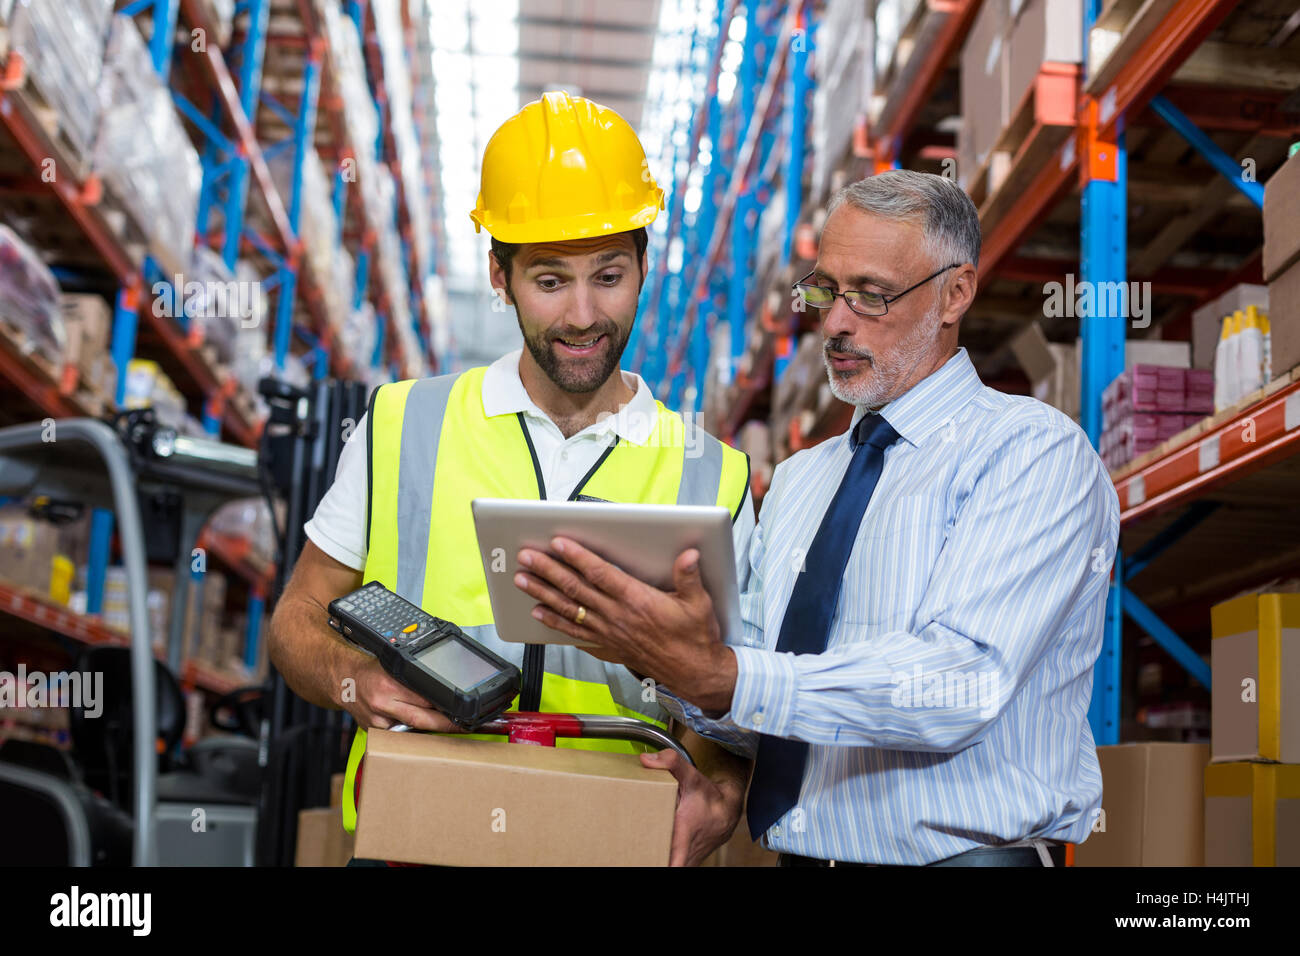 Warehouse manager with interacting male worker over digital tablet Stock Photo